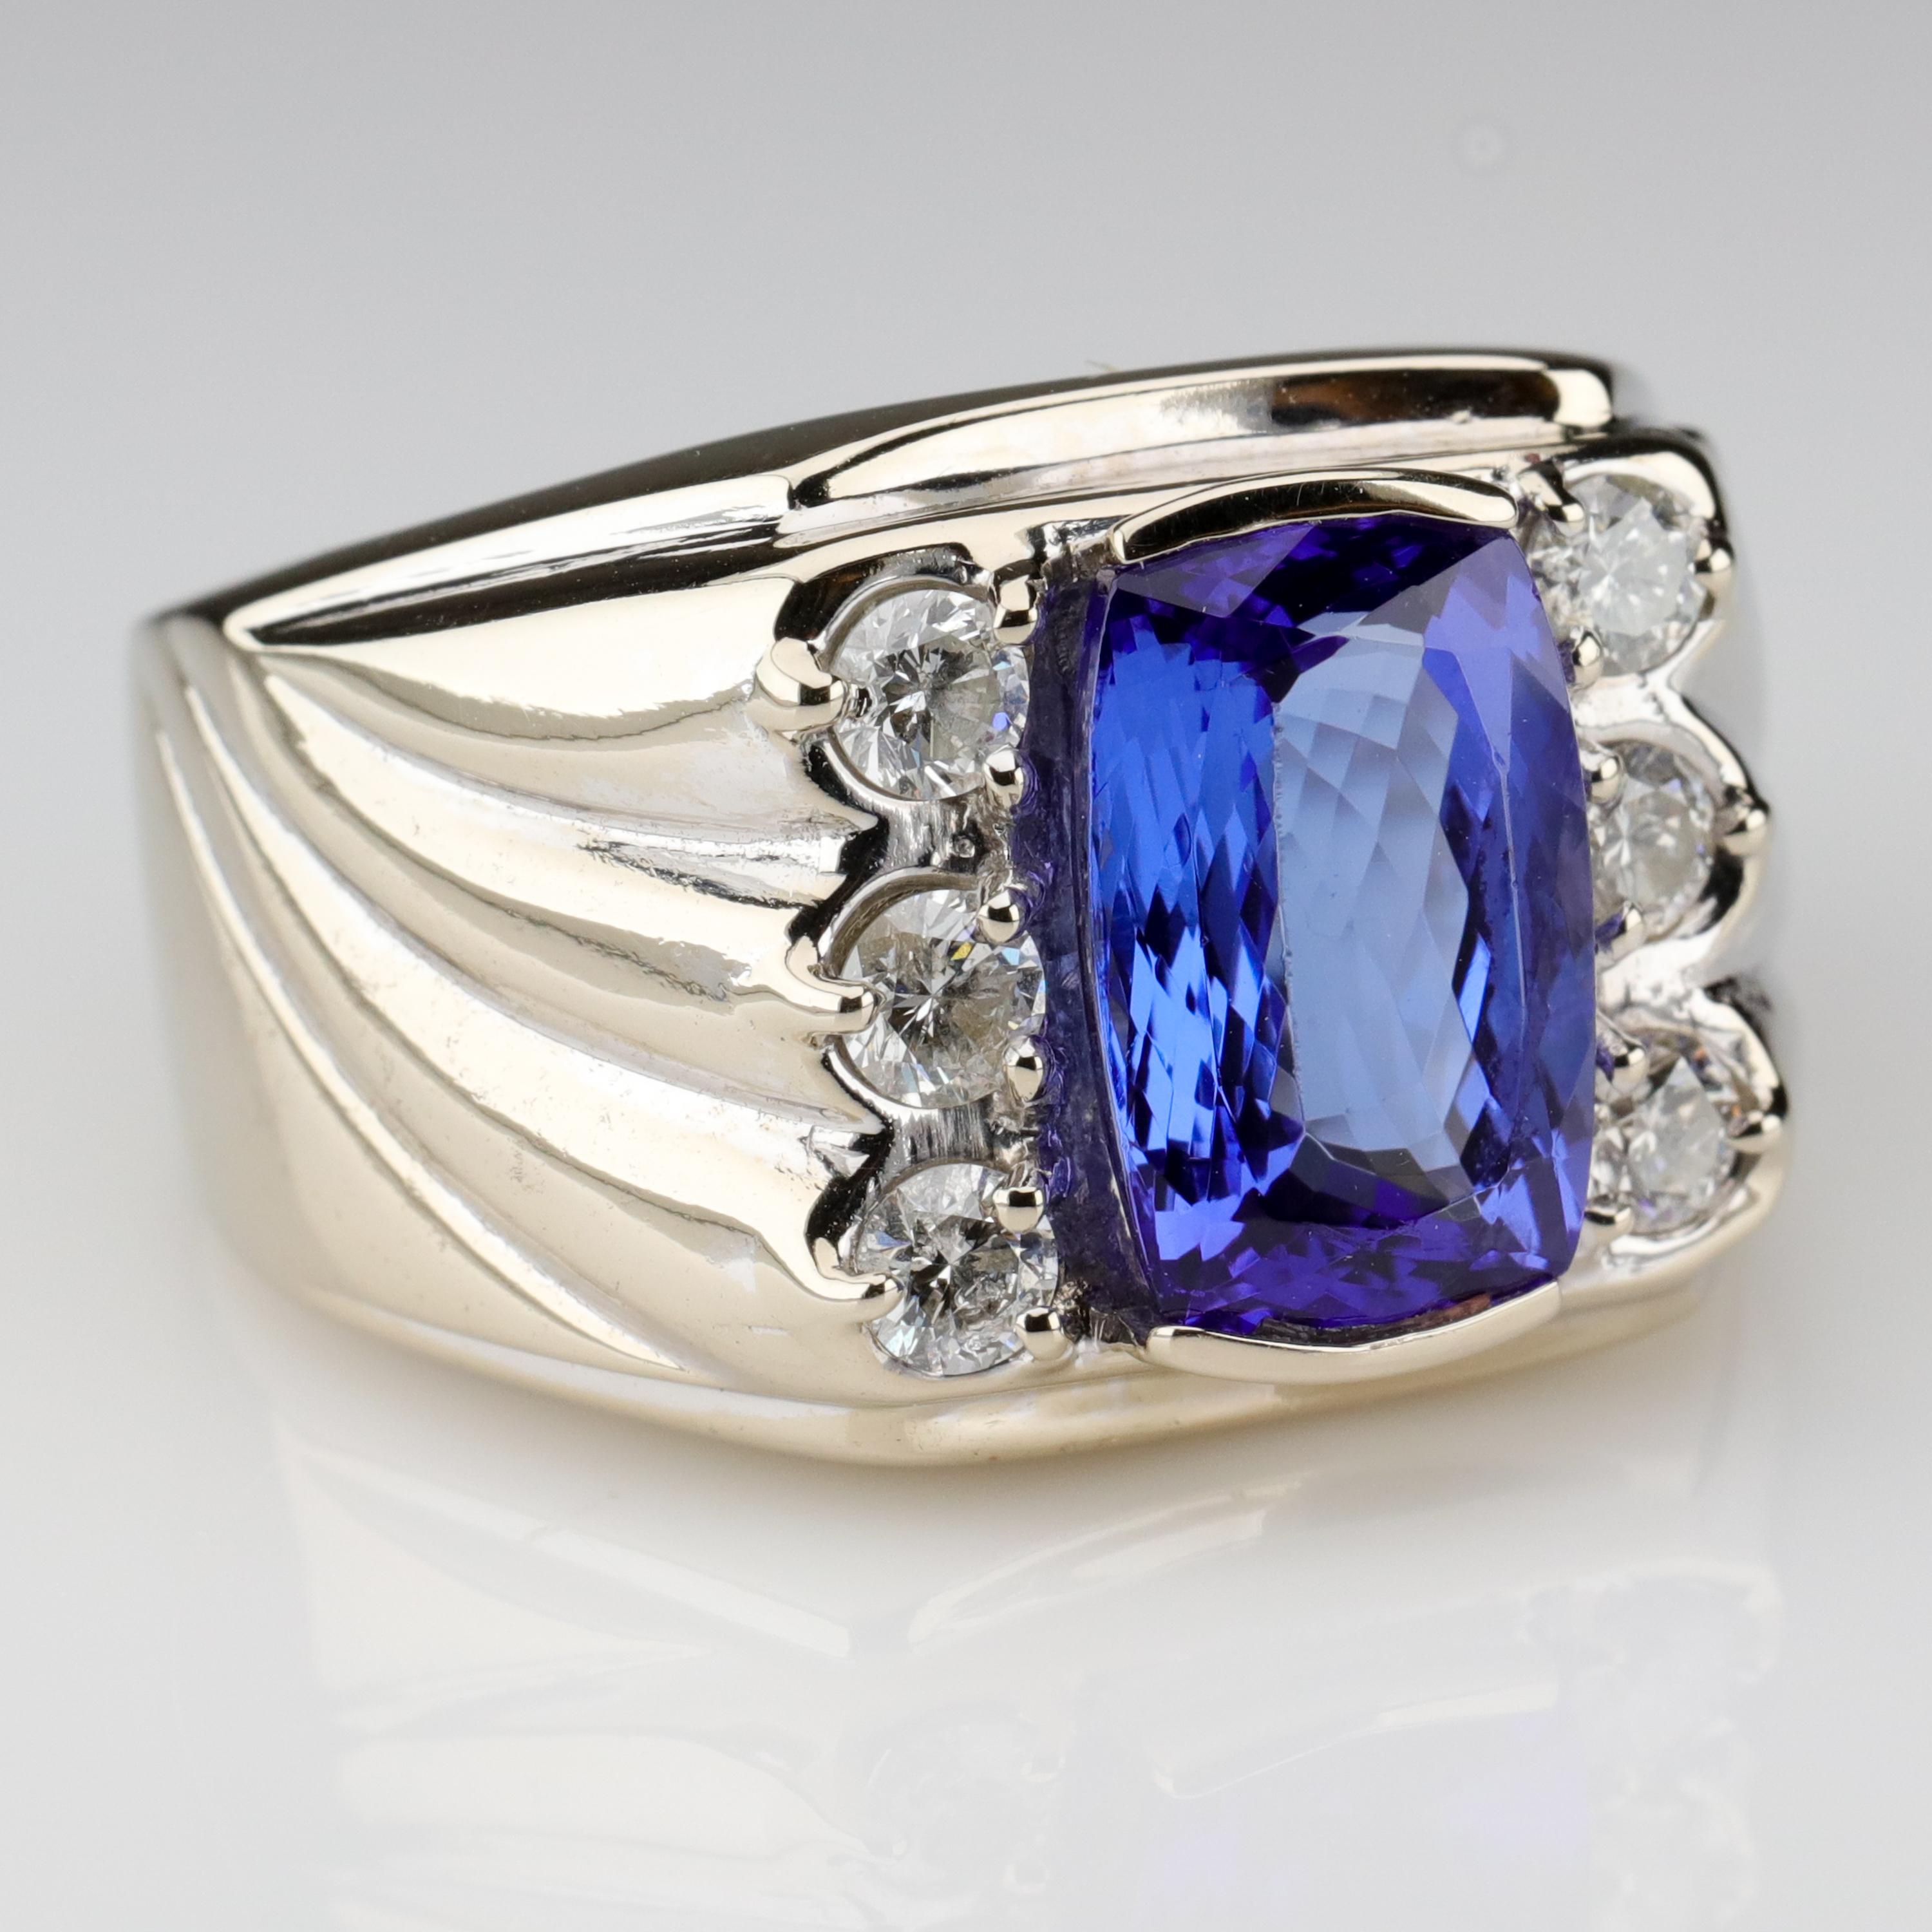 Fatal Attraction, Sony Walkman, Rubik's Cube, Swatch, Willi Wear, The Go-Go's, Erasure, Baby Fae and her baboon heart, MTV, the personal computer, and this massively impressive tanzanite and diamond white gold ring styled in the fashion created by